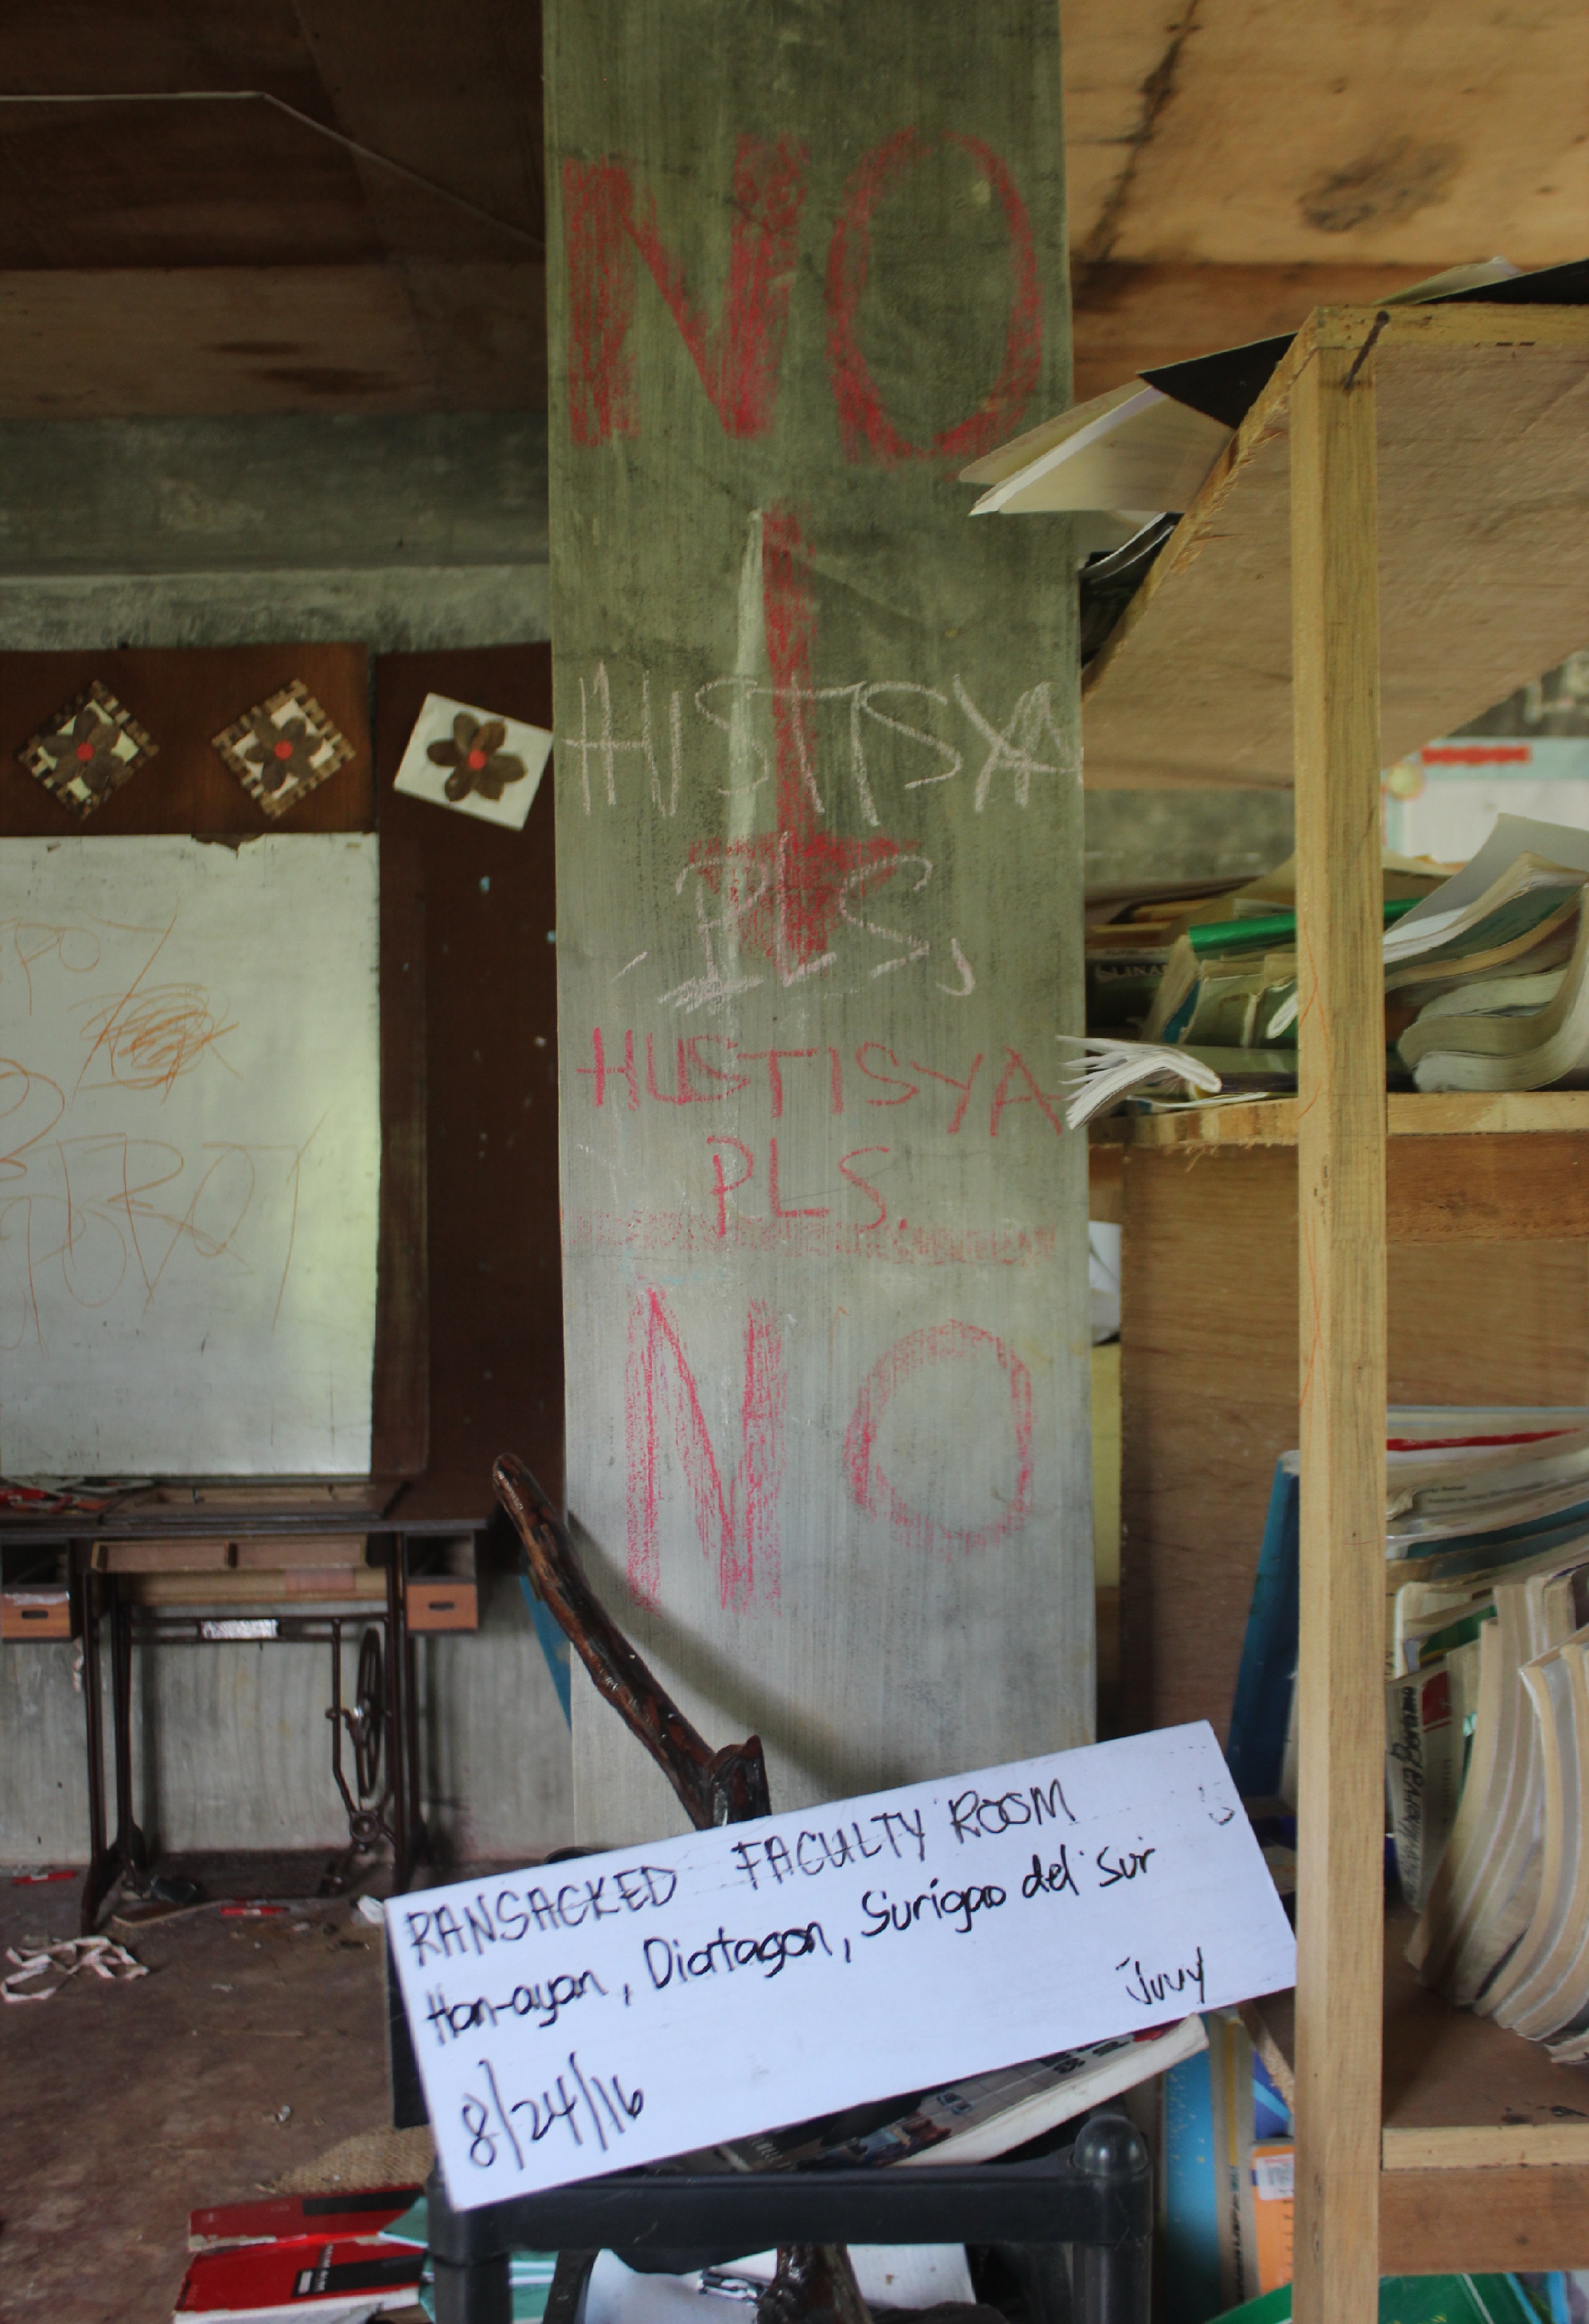 "NO HUSTISYA PLS." Writings in chalk inside the ransacked Alcadev faculty room (Contributed photo)